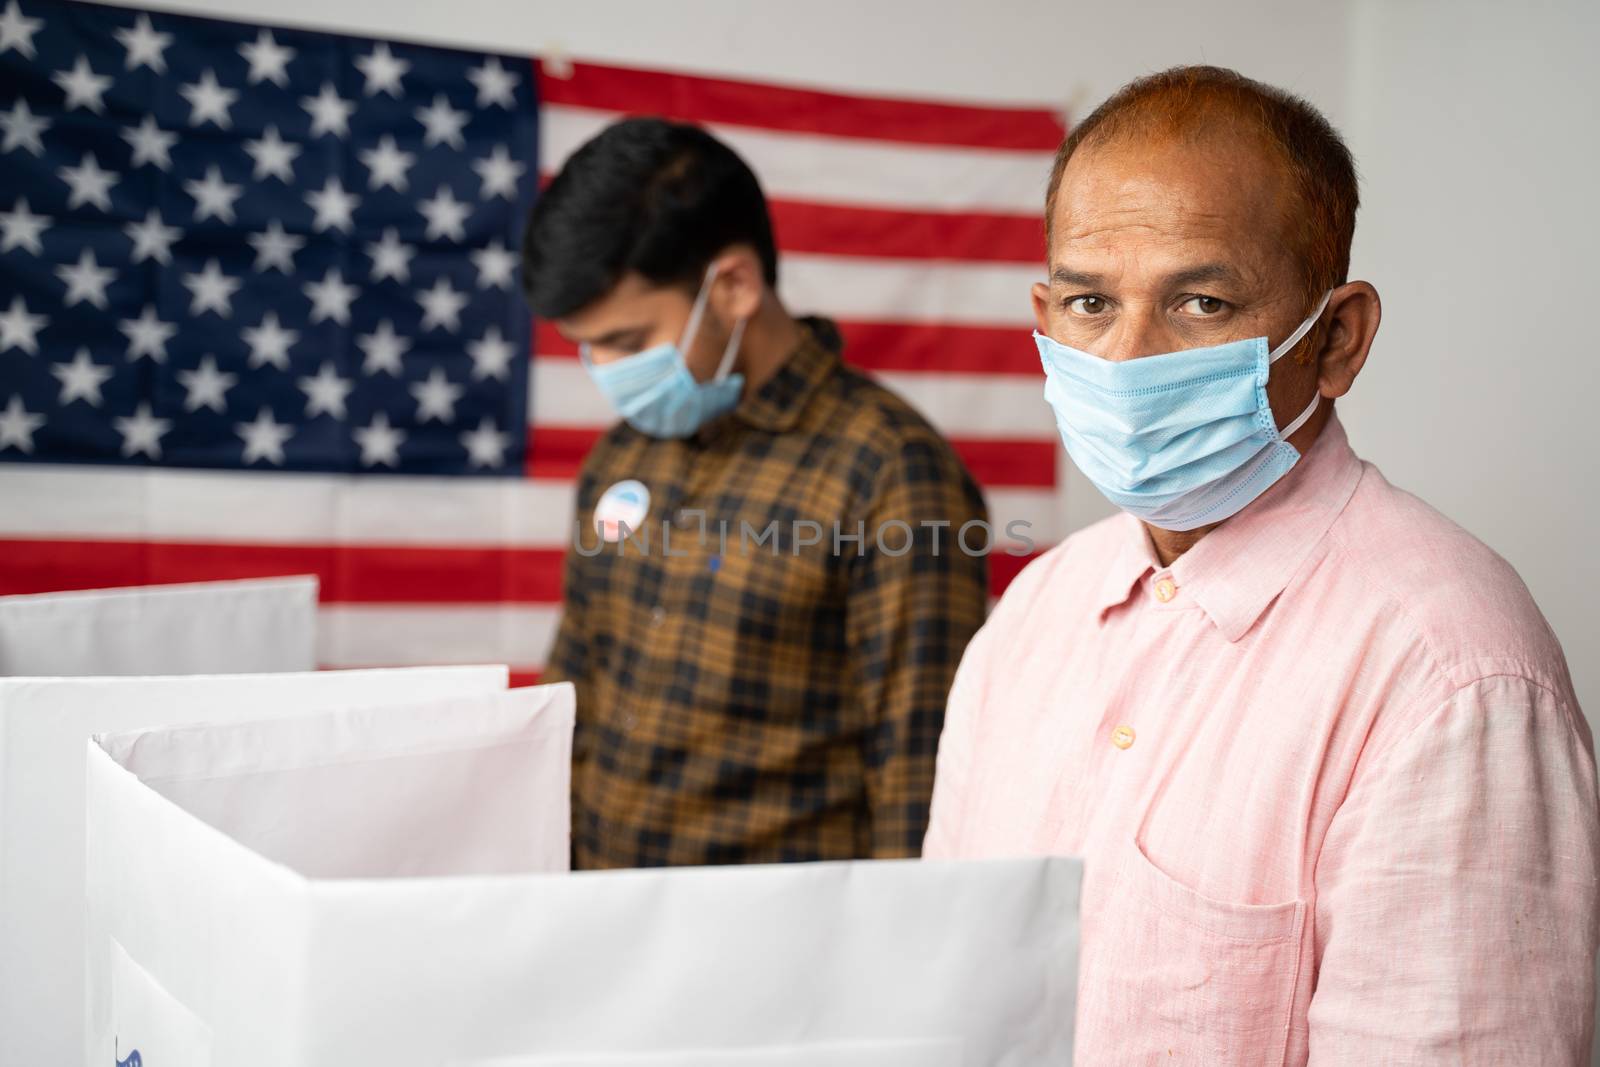 People with mask busy at polling booth for voting with US flag as background - concept of in person voting with covid-19 safety measures at us election.